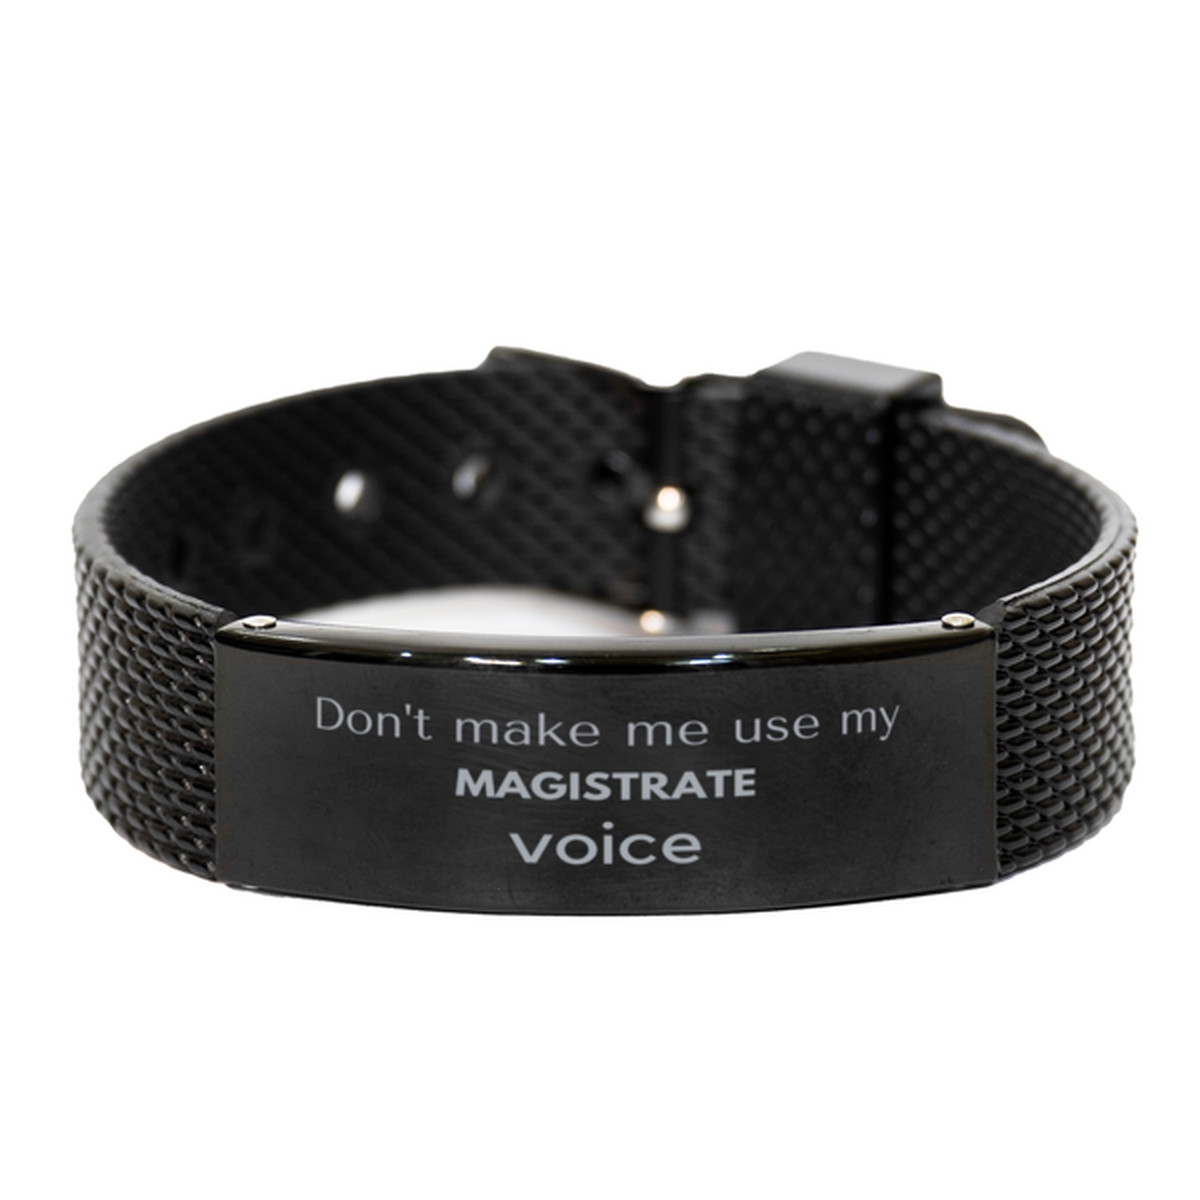 Don't make me use my Magistrate voice, Sarcasm Magistrate Gifts, Christmas Magistrate Black Shark Mesh Bracelet Birthday Unique Gifts For Magistrate Coworkers, Men, Women, Colleague, Friends